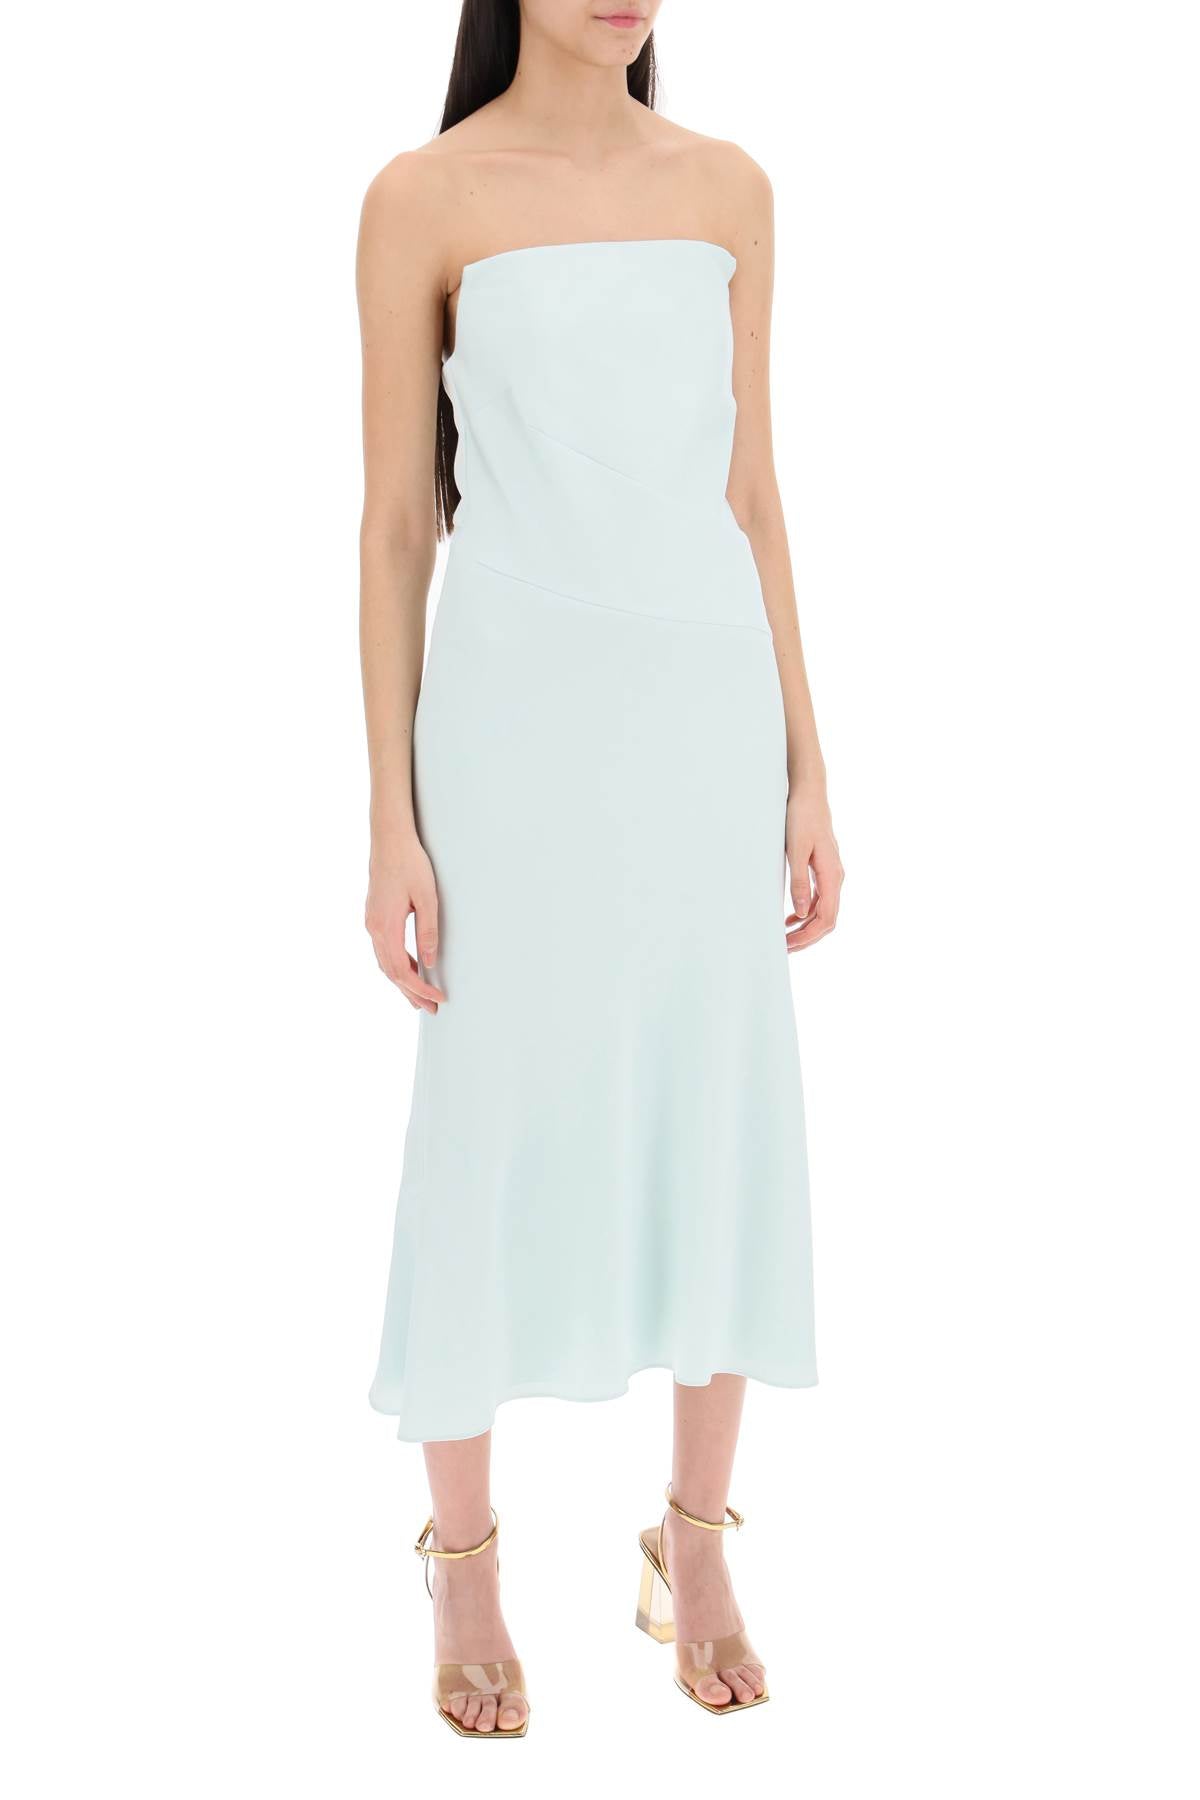 Roland mouret strapless midi dress without-1